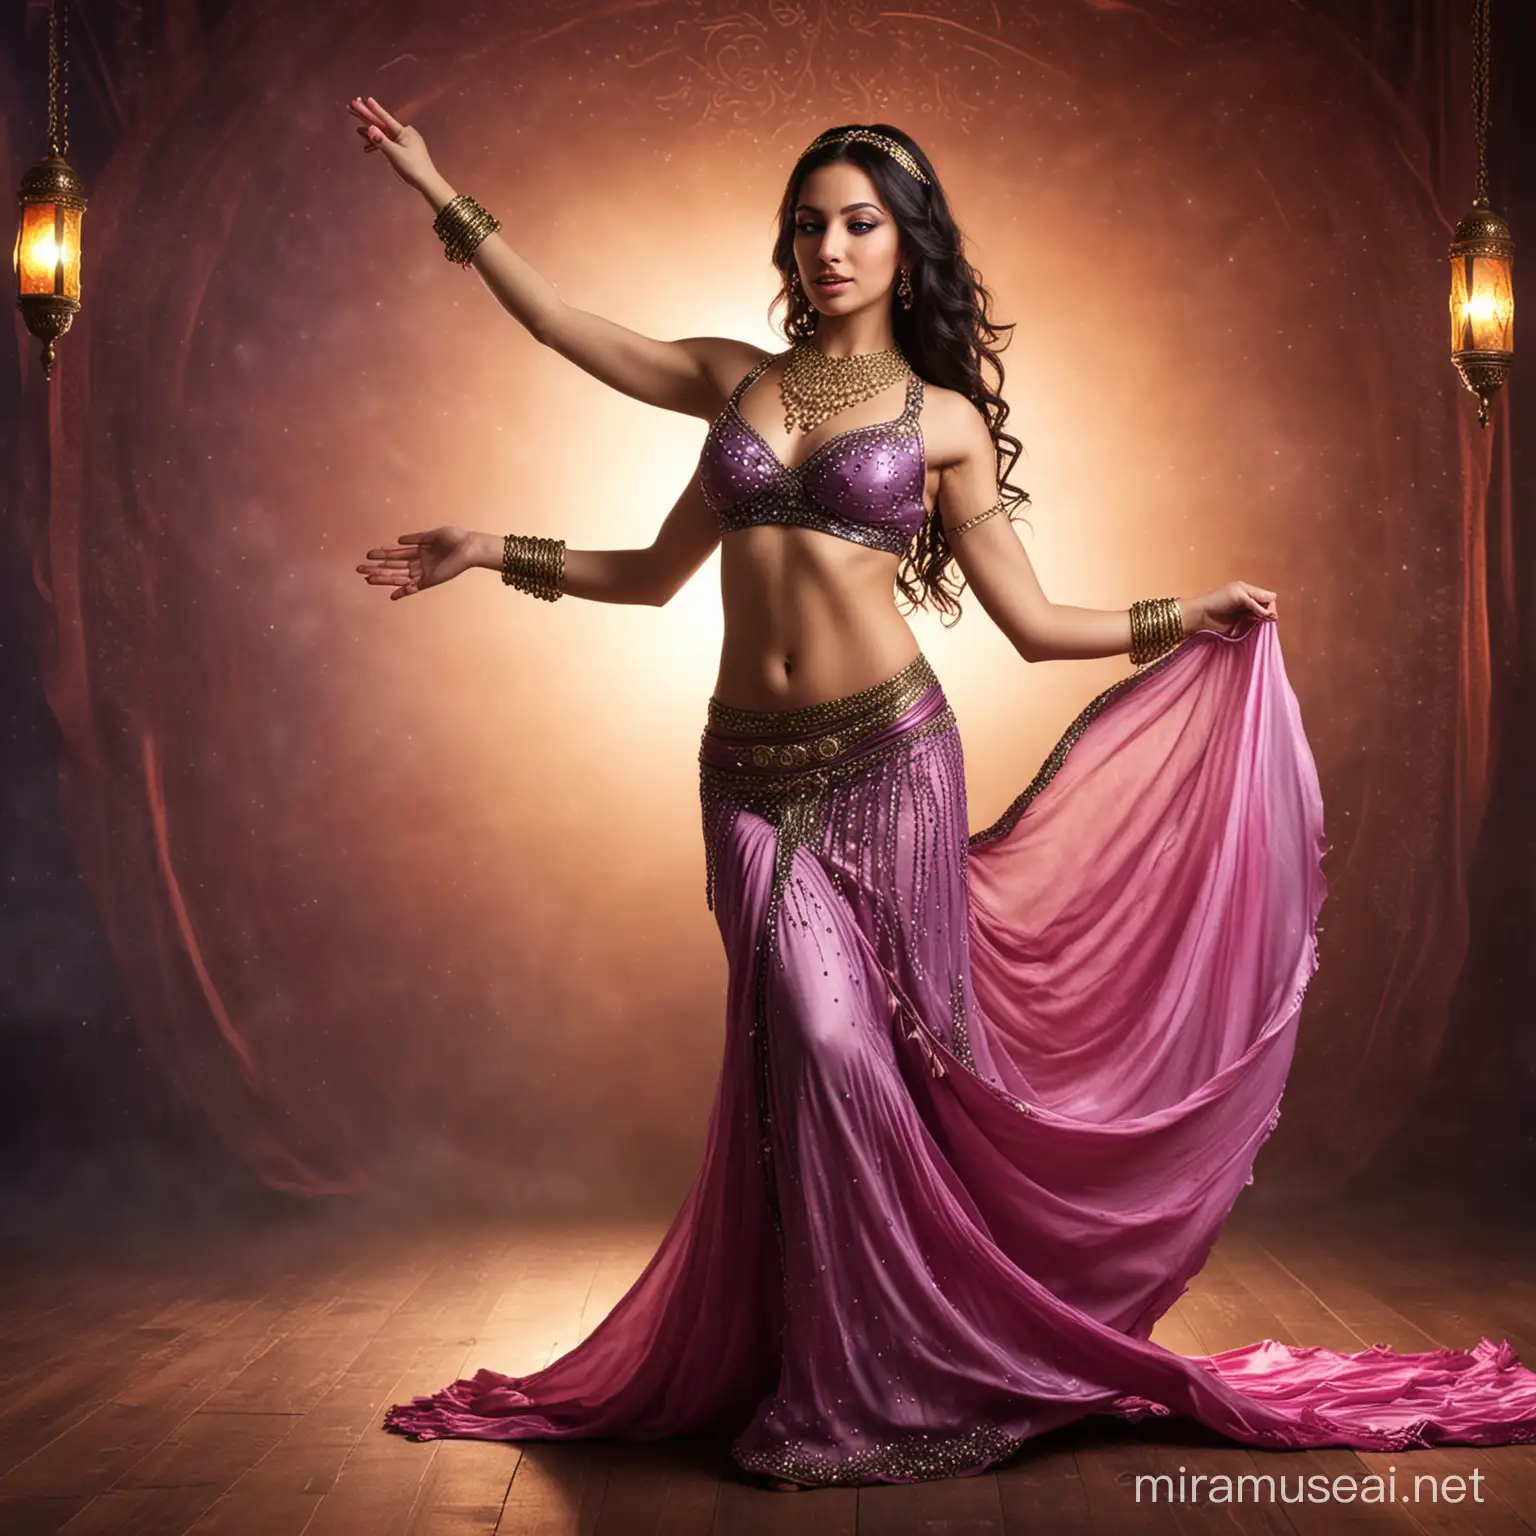 belly dance backround from 1001 nights